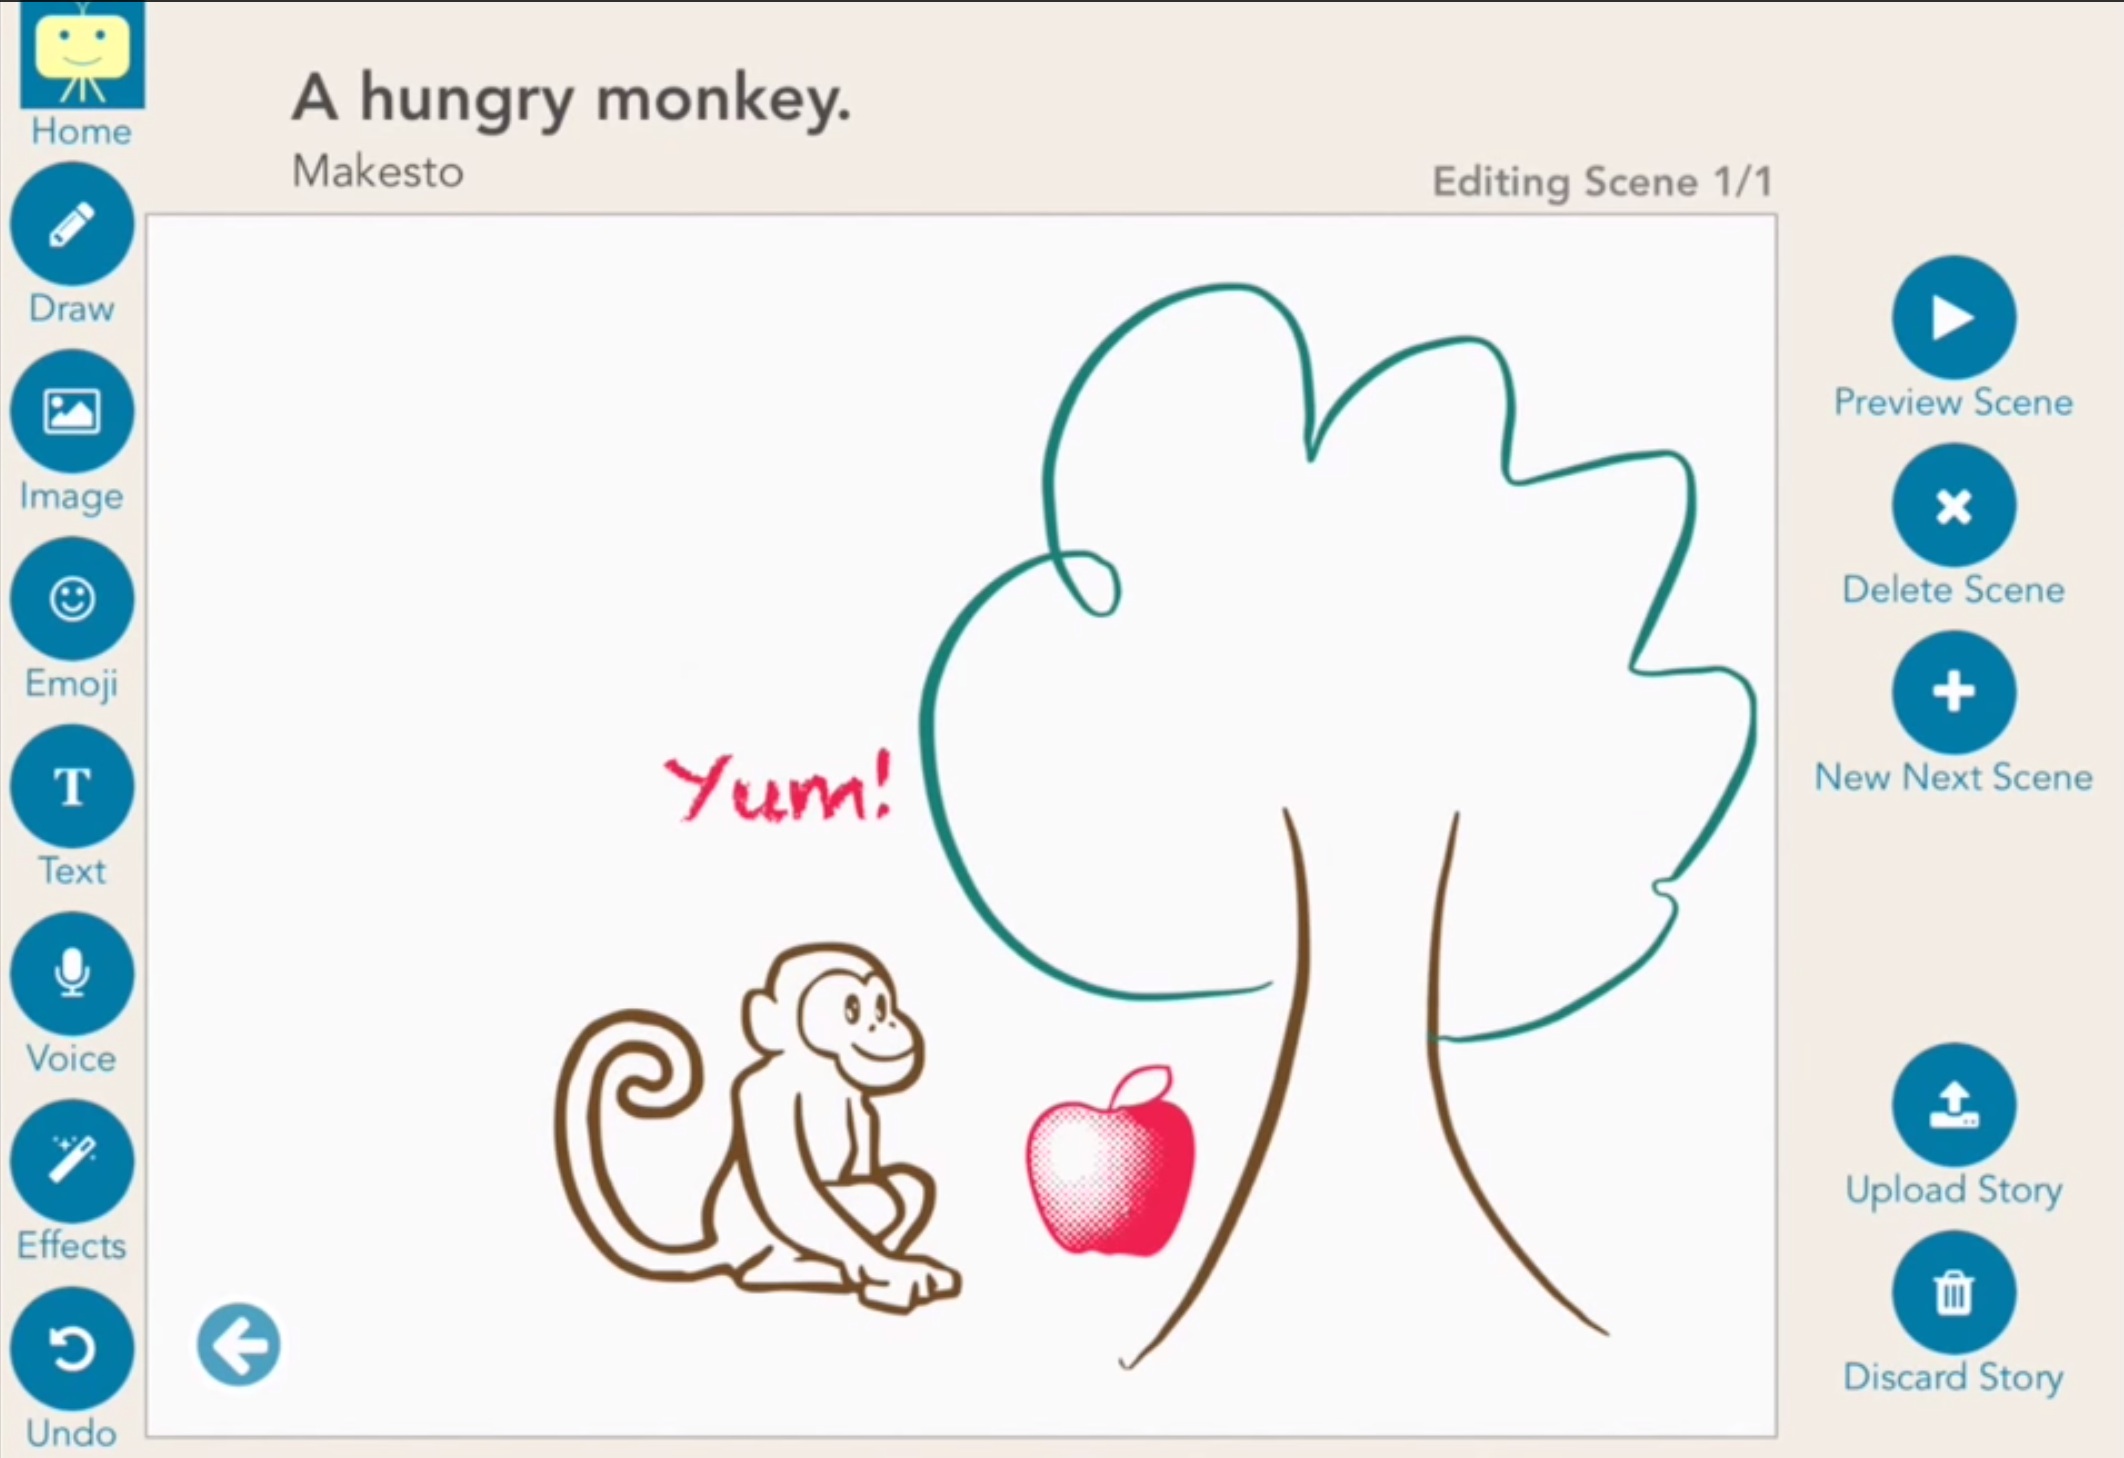 Makesto is a sweet, free storytelling app to let kids’ imaginations run wild